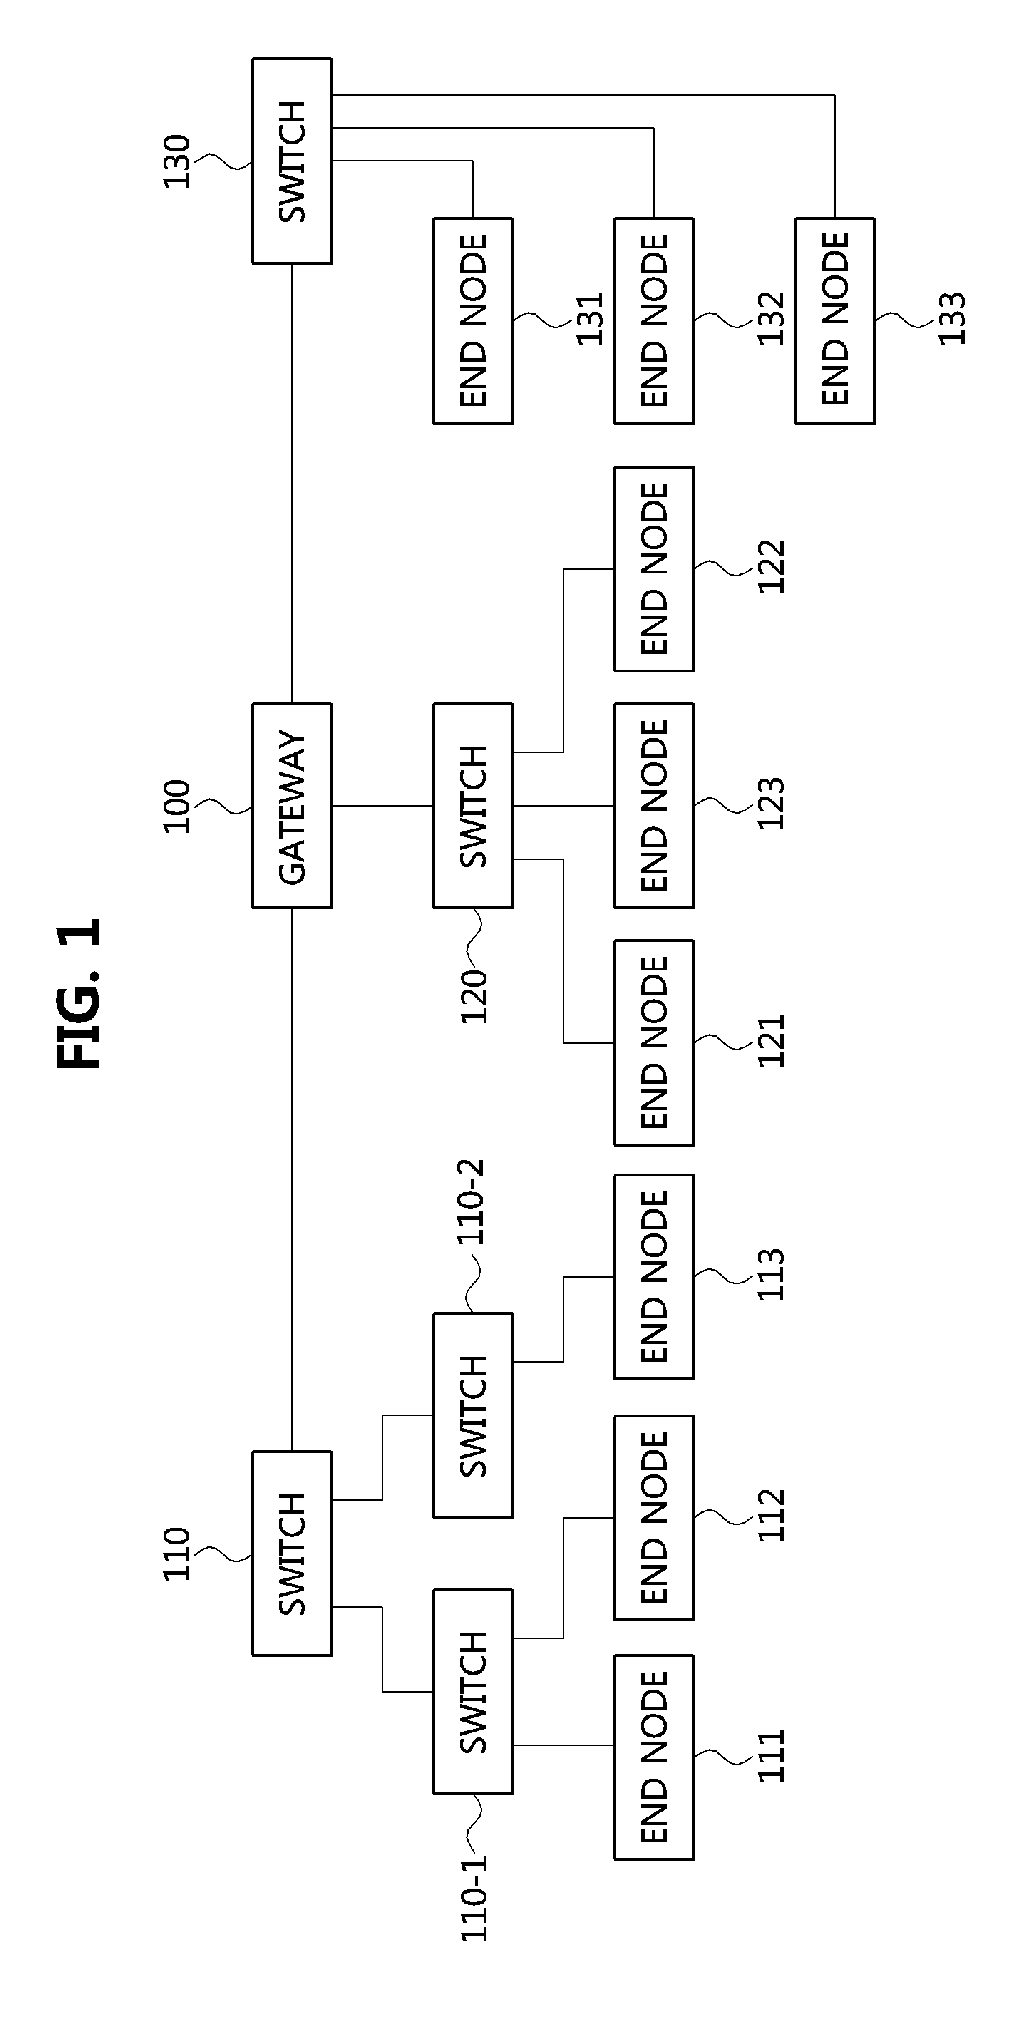 Communication method in divided vehicle network